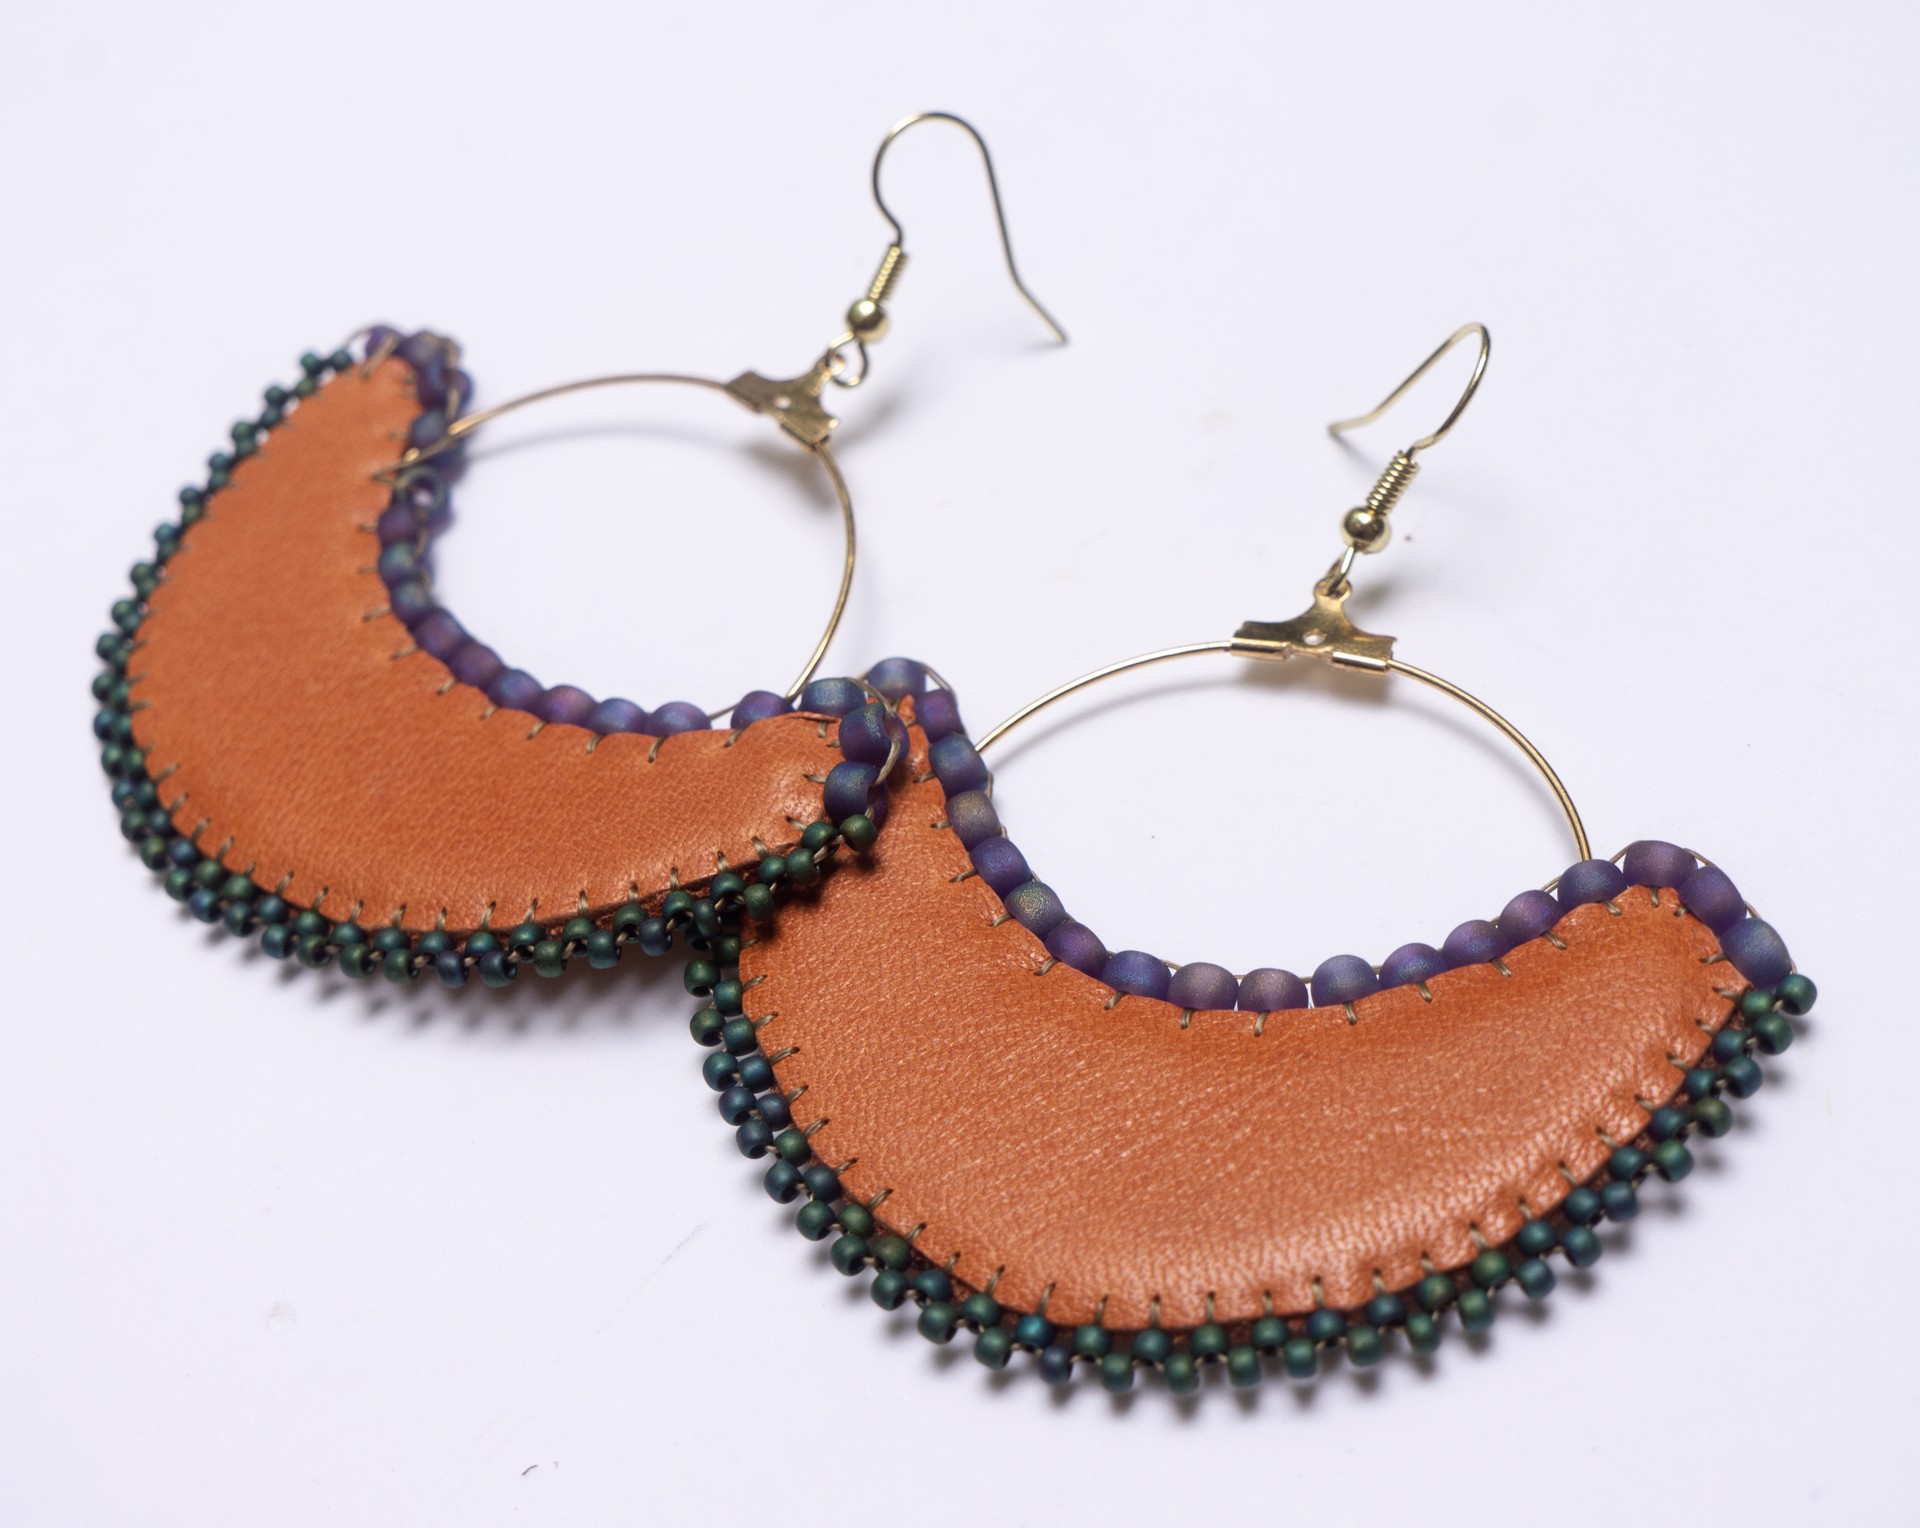 Leather and beaded hoops by Hattie Lee Mendoza